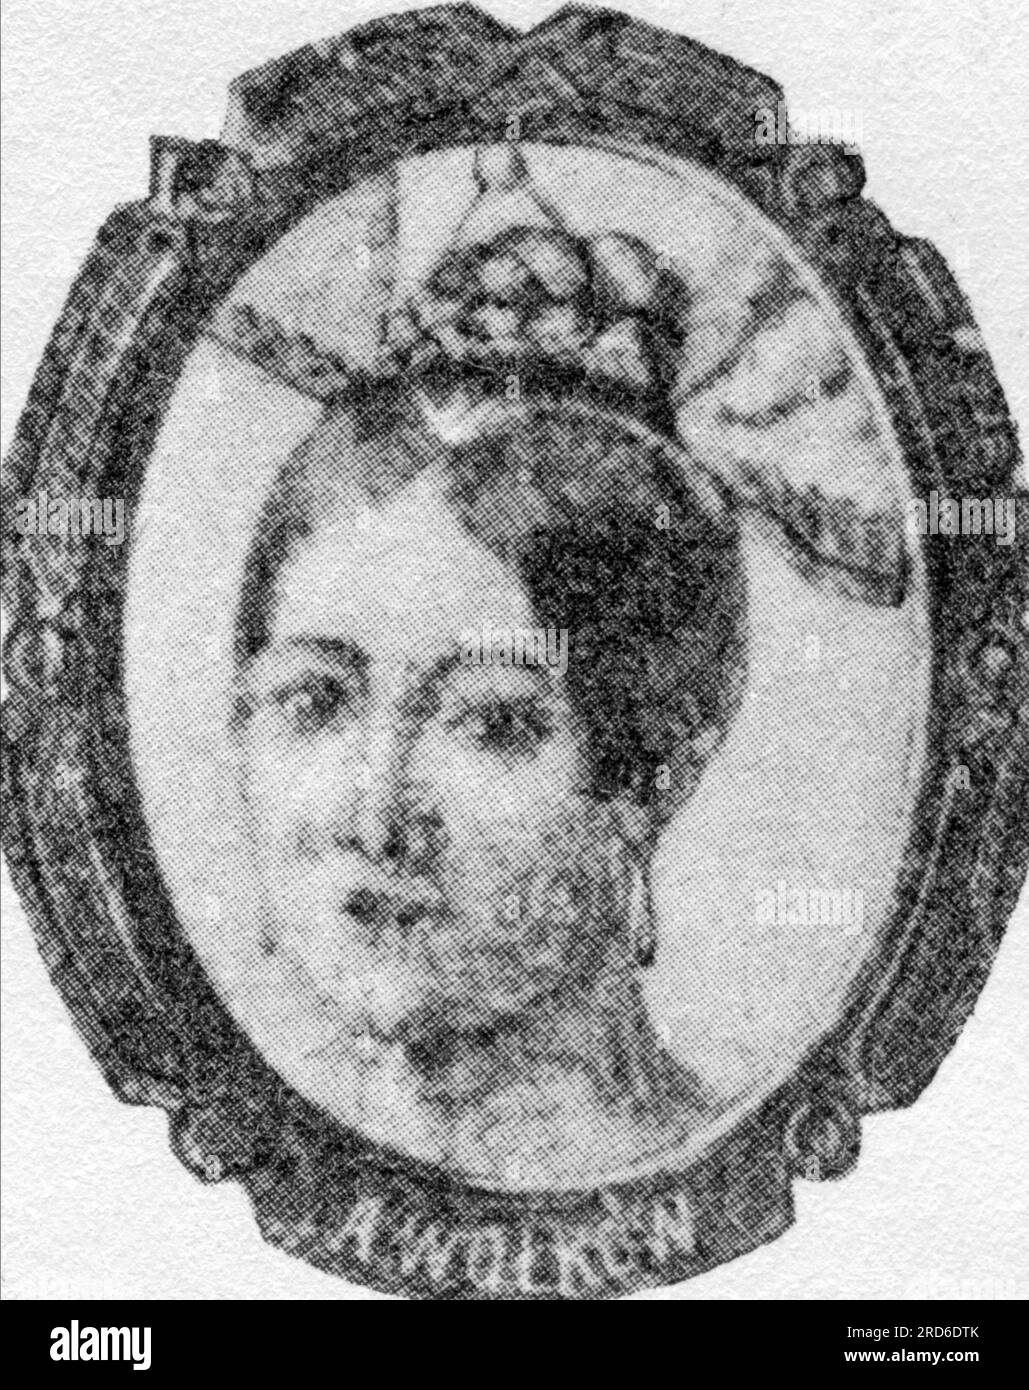 Wolkow, Anna, 26.8.1808 / 1811 - 25.6.1845, Polish singer, woodcut, 19th century, ADDITIONAL-RIGHTS-CLEARANCE-INFO-NOT-AVAILABLE Stock Photo